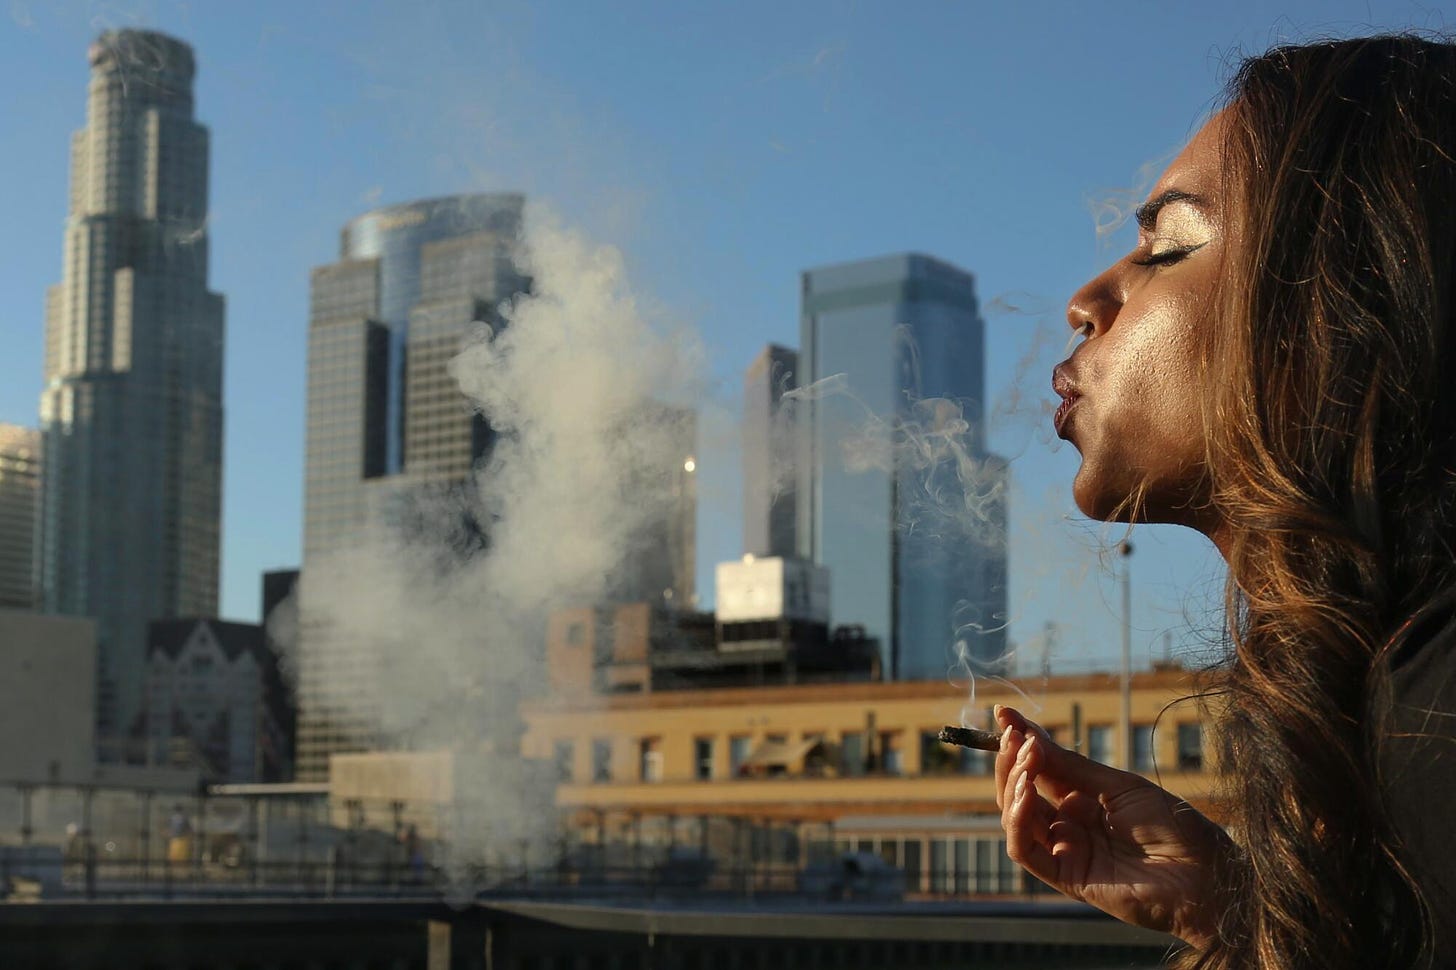 A woman exhales smoke over the downtown L.A. skyline.